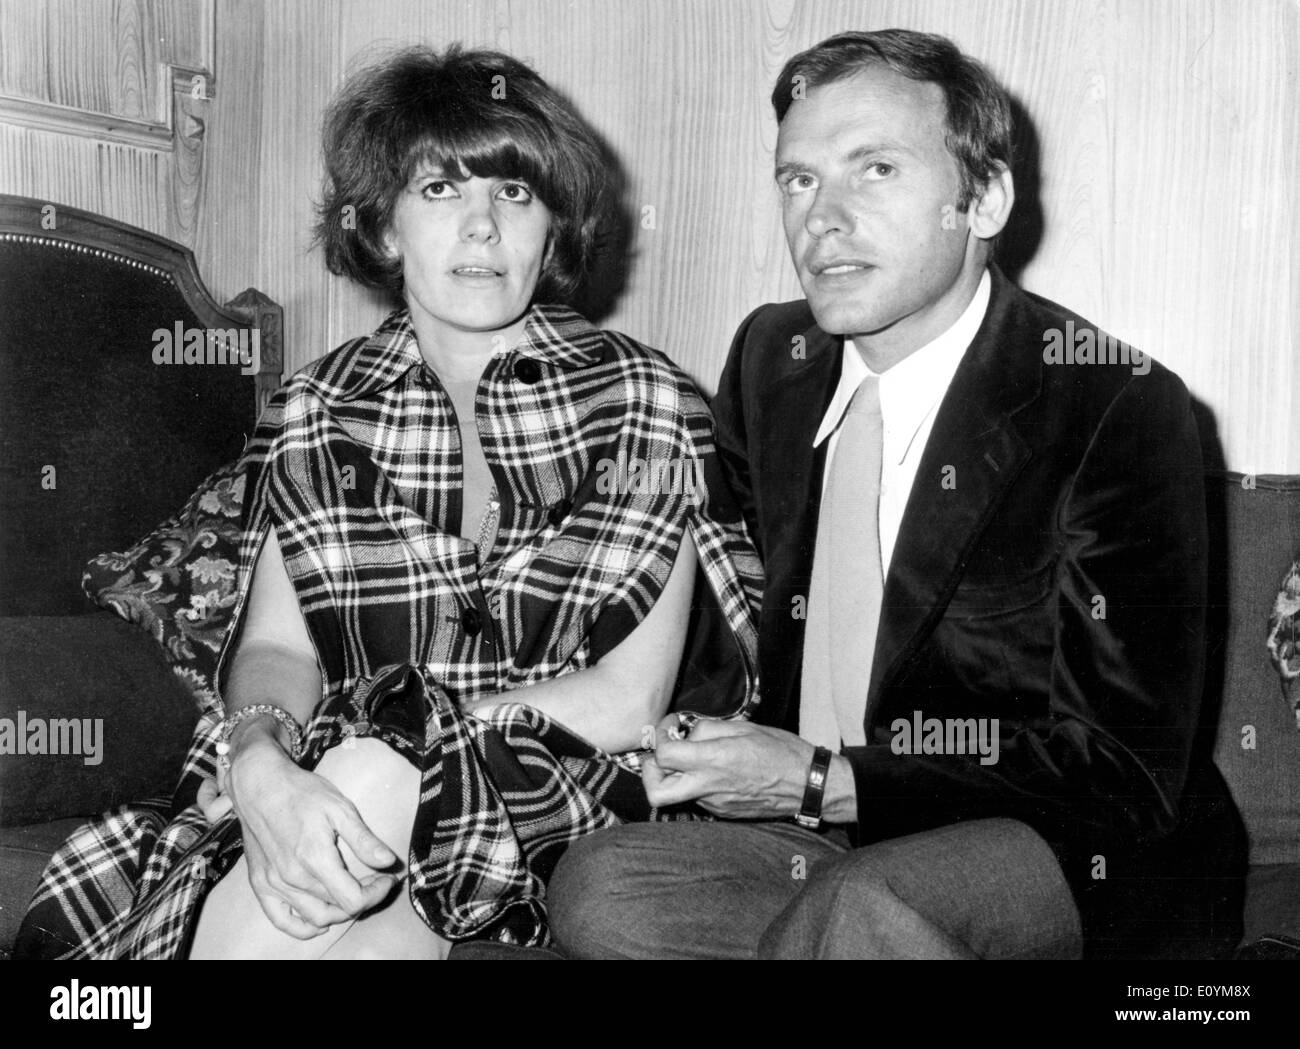 Nadine and Jean-Louis Trintignant at press conference Stock Photo